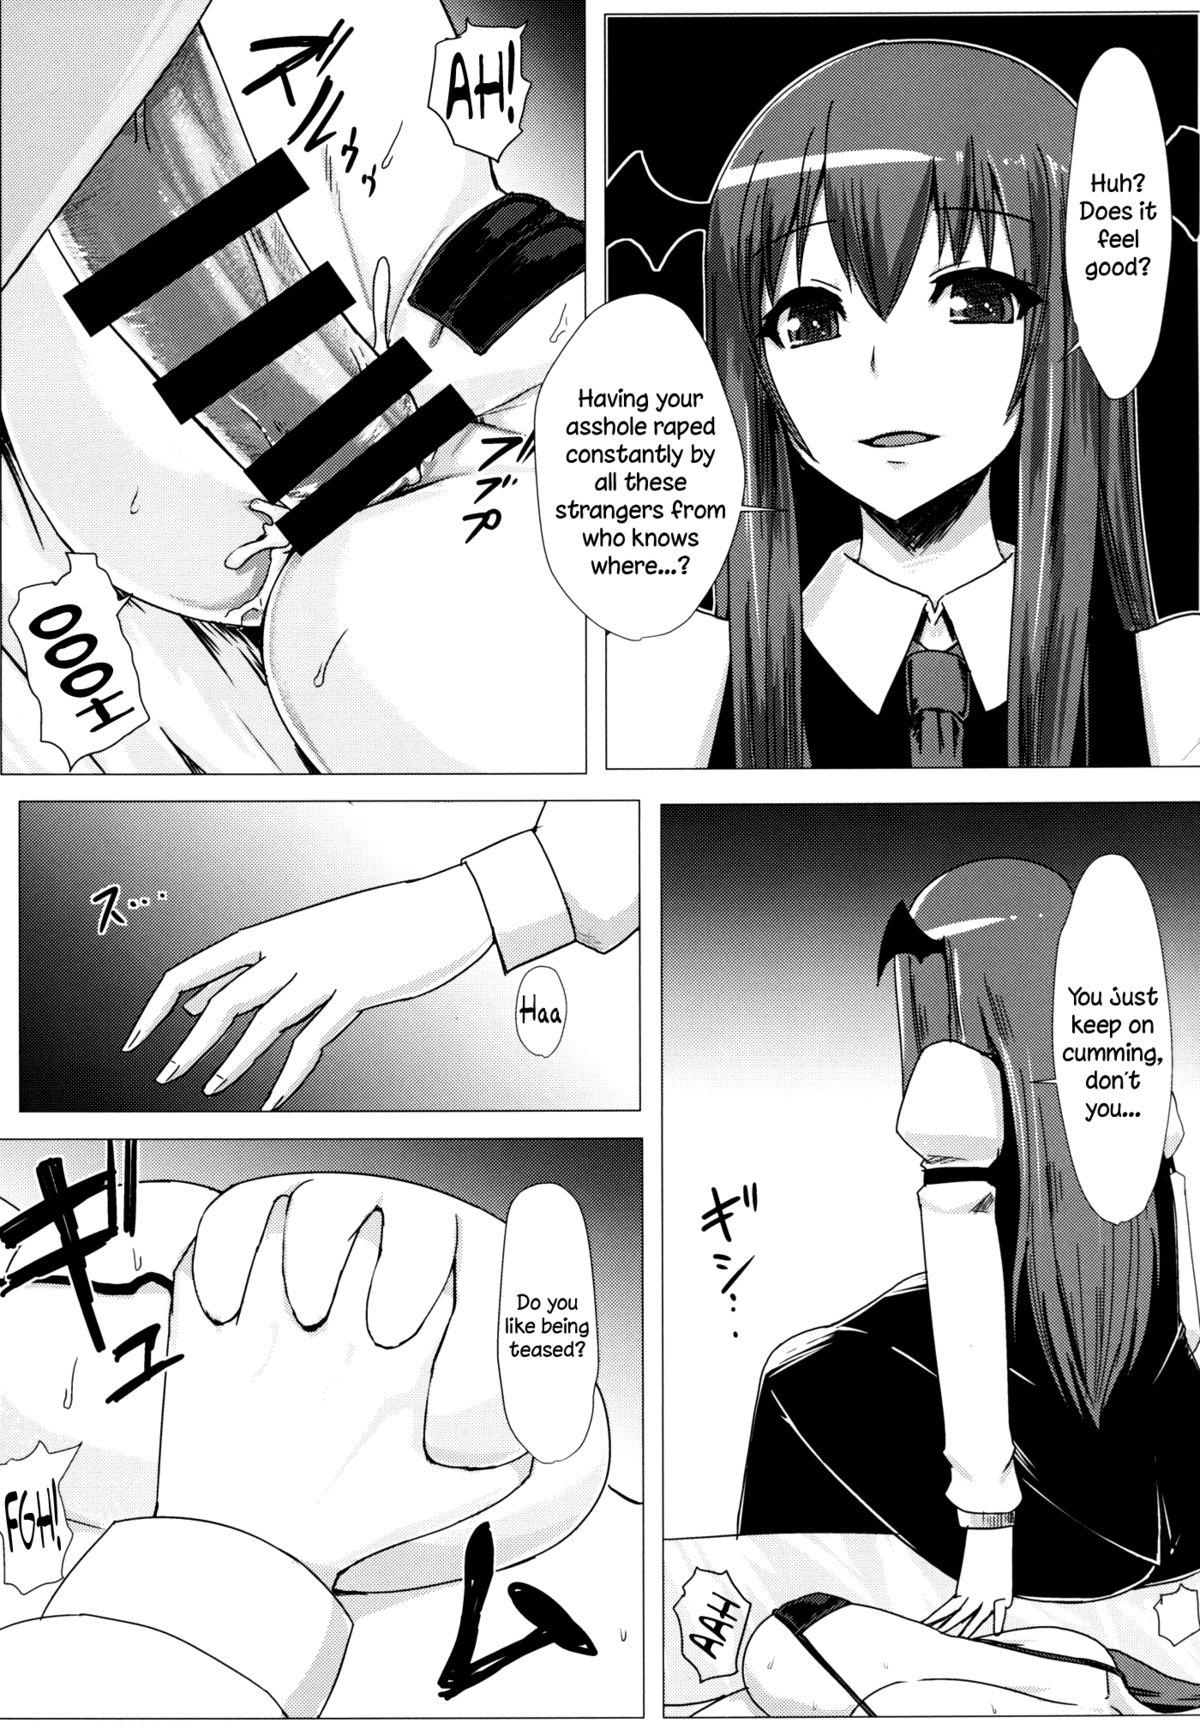 Village Shiri Pache Pache | Ass Patchy Patchy - Touhou project Sex - Page 6